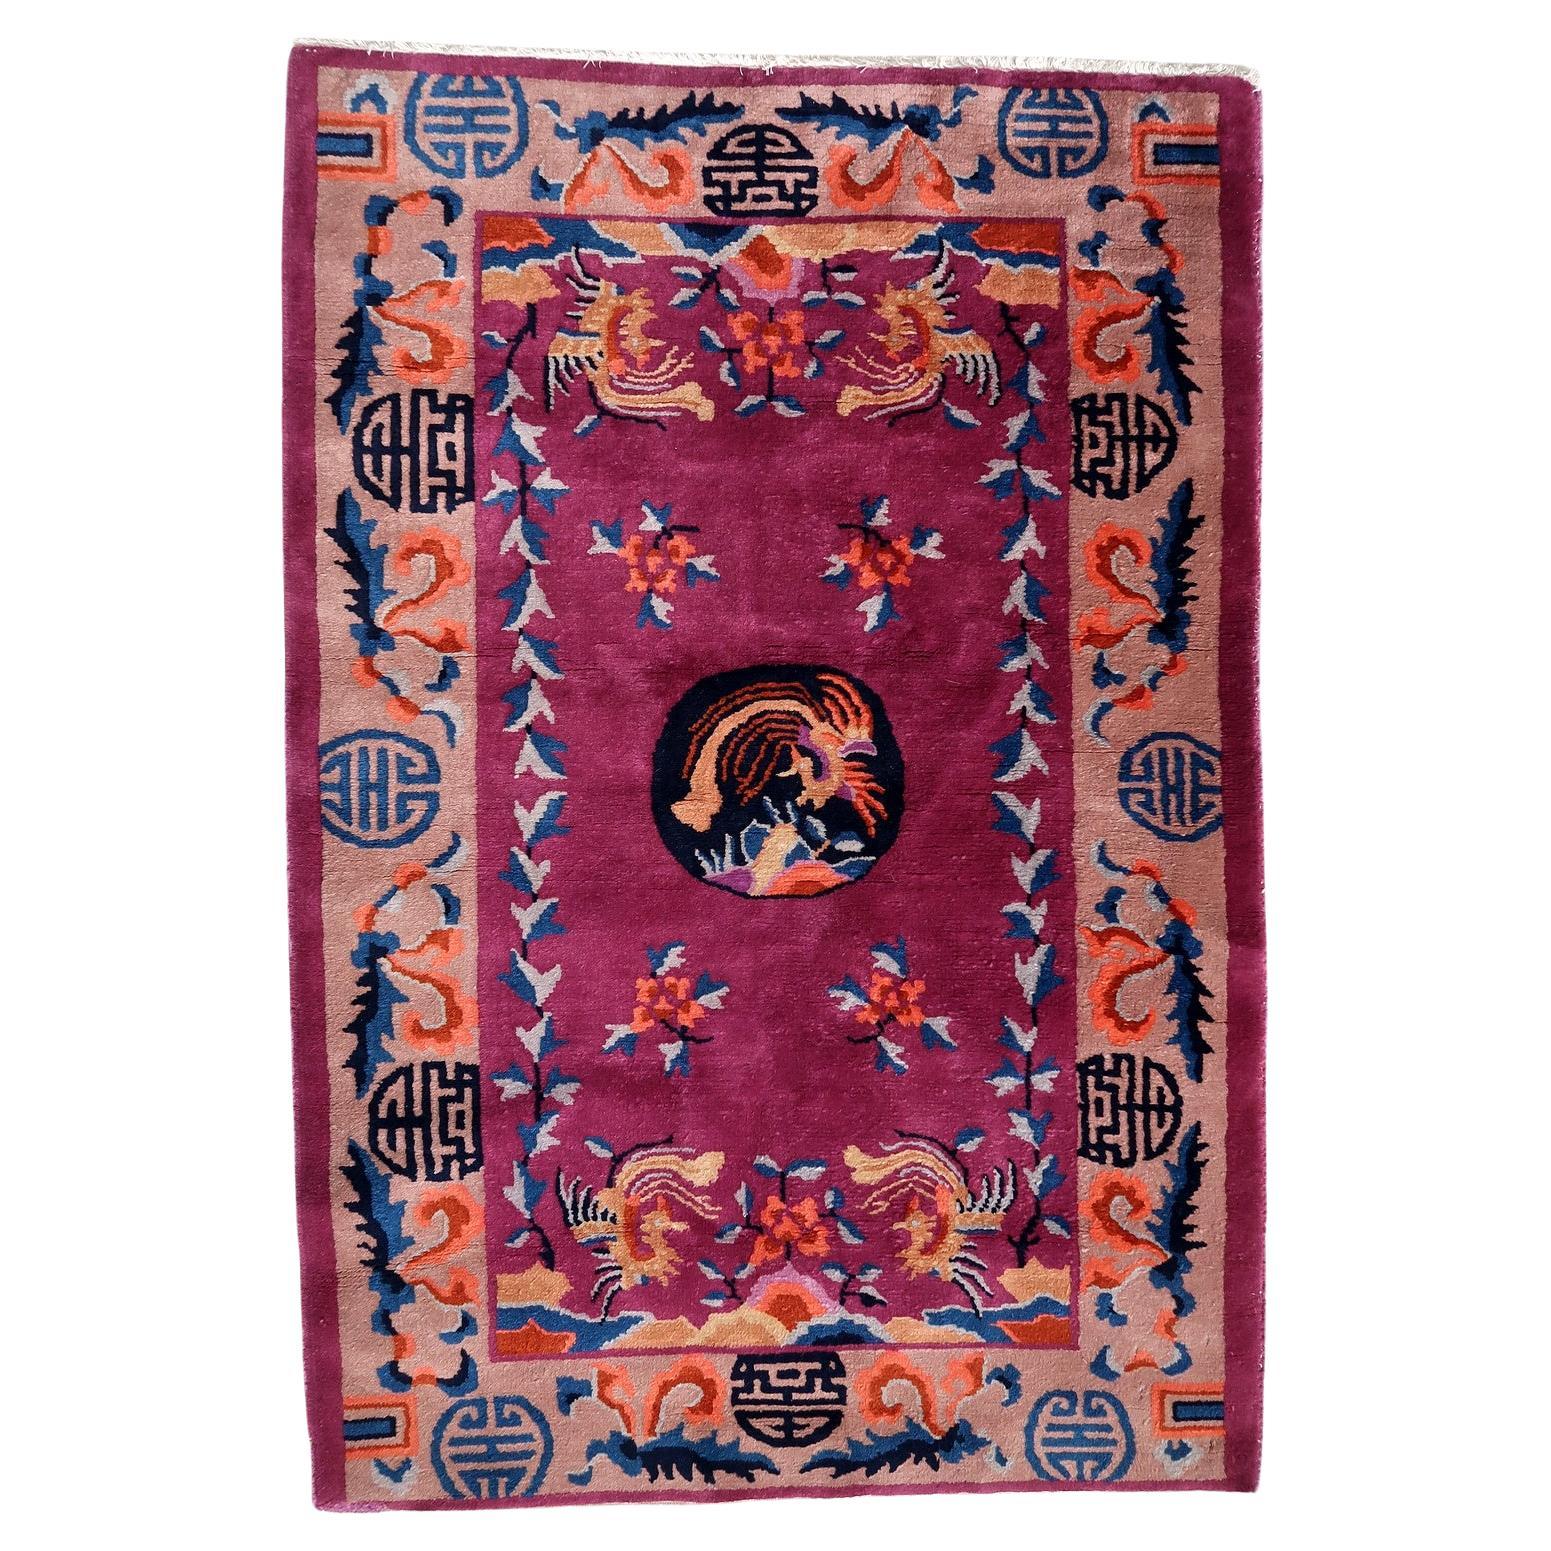 Handmade Antique Art Deco Chinese Rug 3.1' x 4.5', 1920s - 1C1134 For Sale